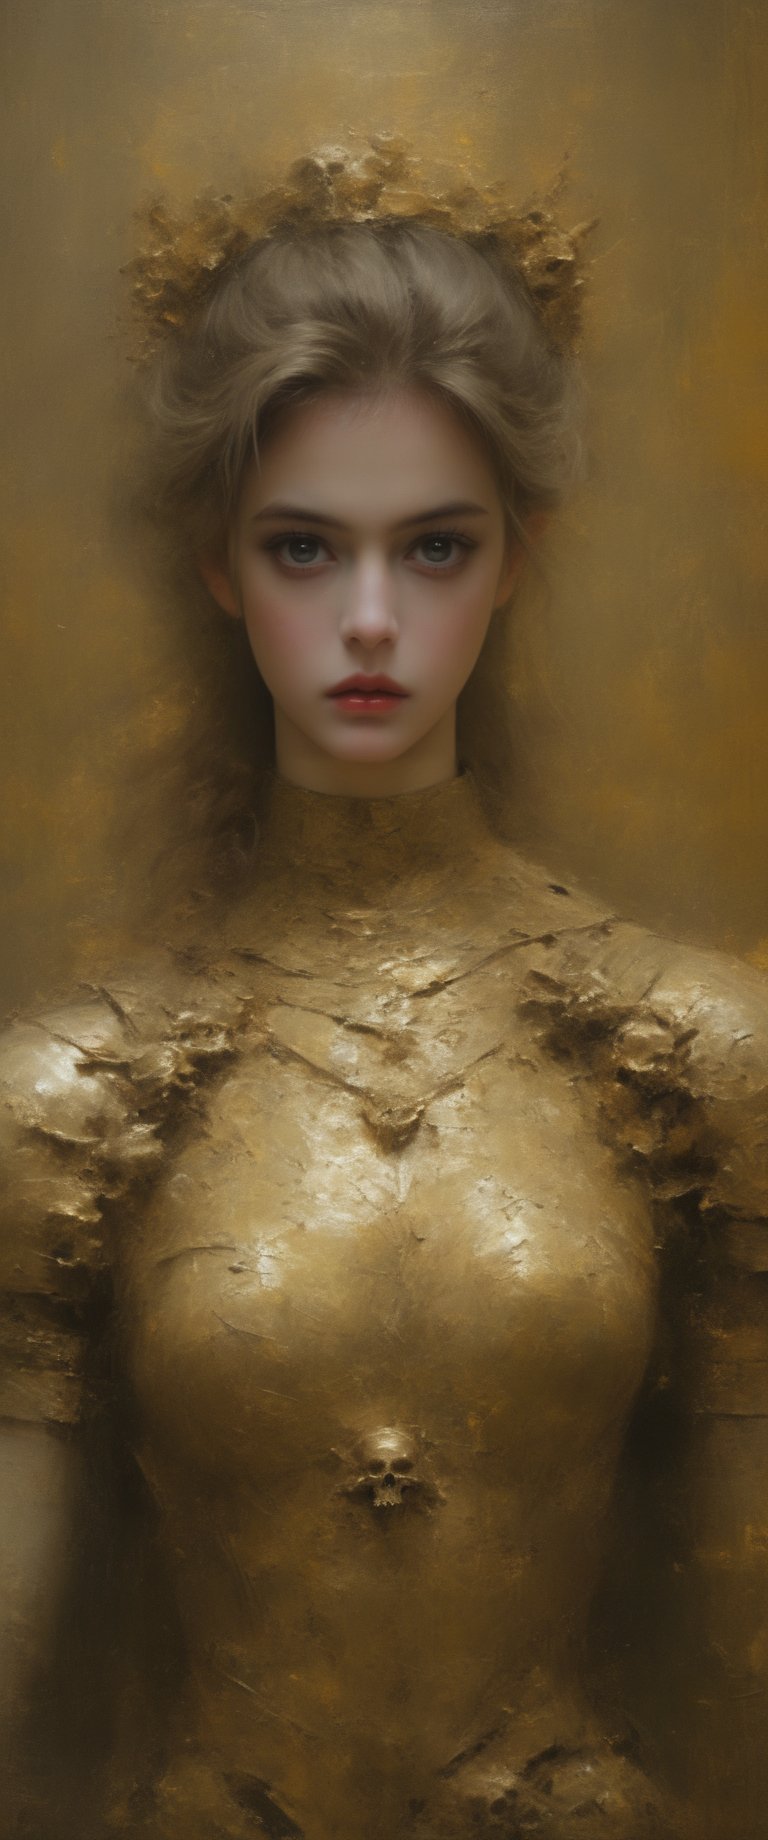 breathtaking ethereal RAW photo of female ((athena, god with a scepter in from of an altar, golden armor

)), dark and moody style, perfect face, outstretched perfect hands . masterpiece, professional, award-winning, intricate details, ultra high detailed, 64k, dramatic light, volumetric light, dynamic lighting, Epic, splash art .. ), by james jean $, roby dwi antono $, ross tran $. francis bacon $, michal mraz $, adrian ghenie $, petra cortright $, gerhard richter $, takato yamamoto $, ashley wood, tense atmospheric, , , , sooyaaa,IMGFIX,Comic Book-Style,Movie Aesthetic,action shot,photo r3al,bad quality image,oil painting, cinematic moviemaker style,Japan Vibes,H effect,koh_yunjung ,koh_yunjung,kwon-nara,sooyaaa,colorful,bones,skulls,armor,han-hyoju-xl
,DonMn1ghtm4reXL, , , , 
